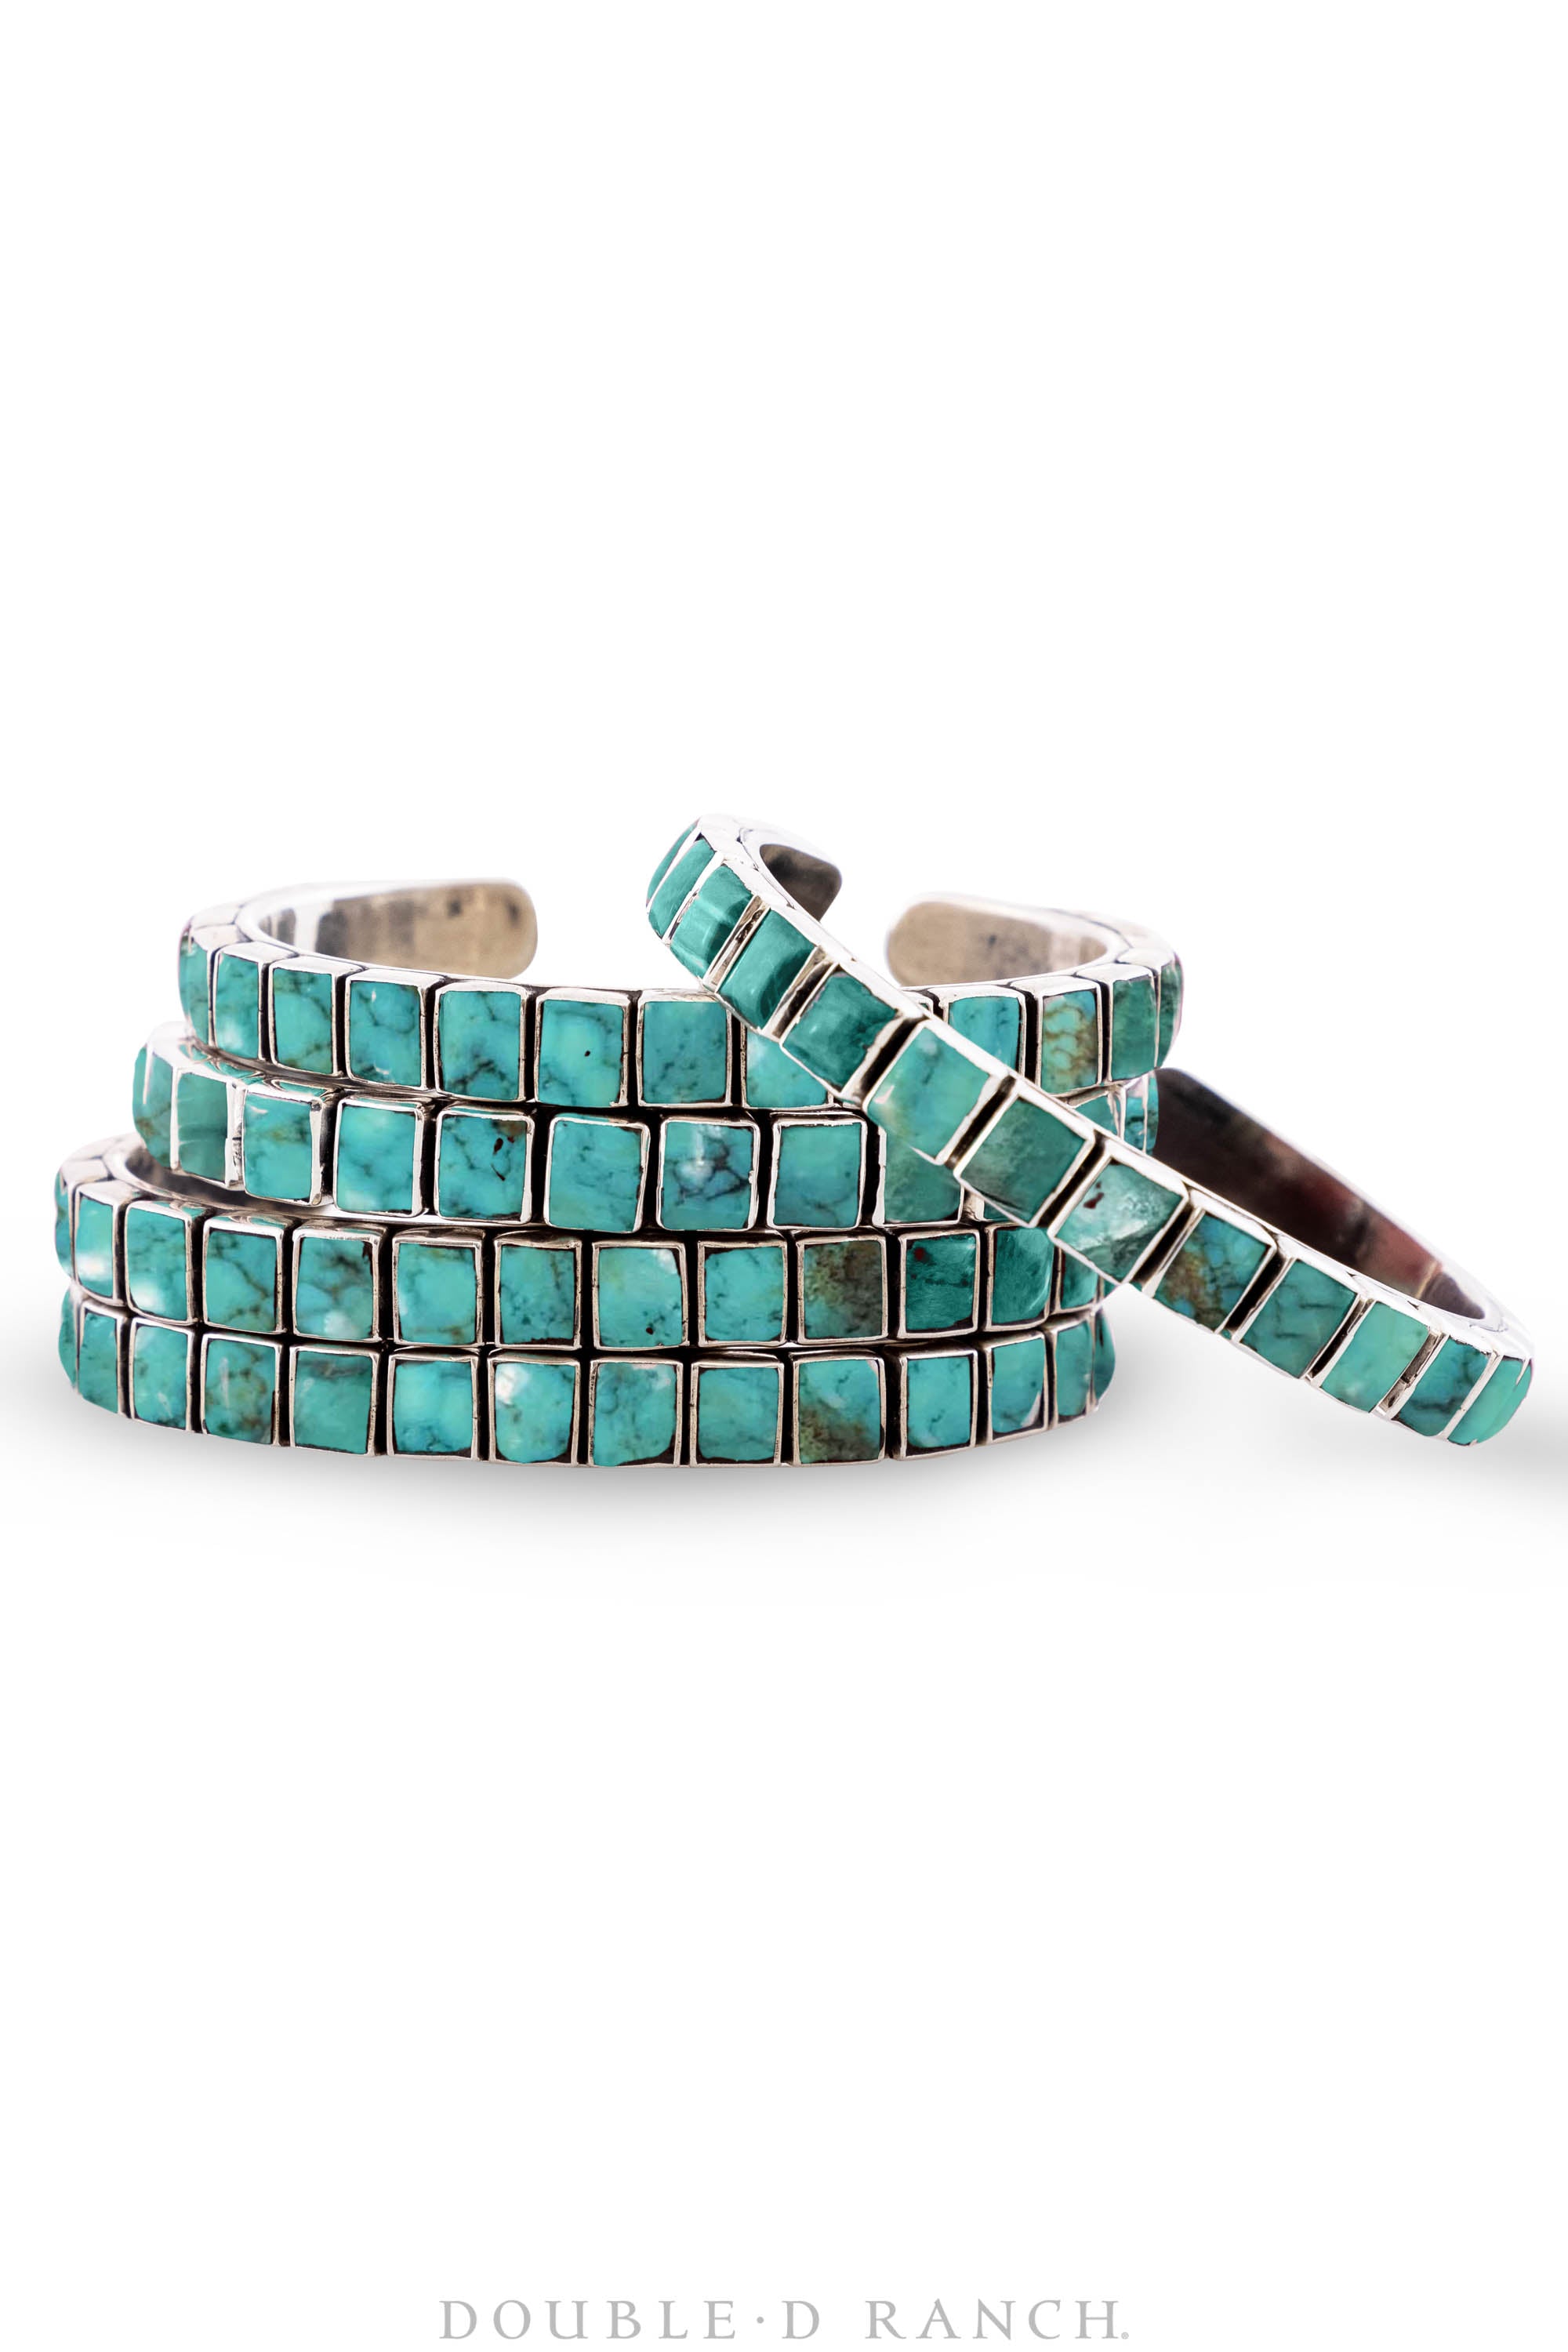 Elsa Peretti® Color by the Yard Turquoise Bracelet in Silver